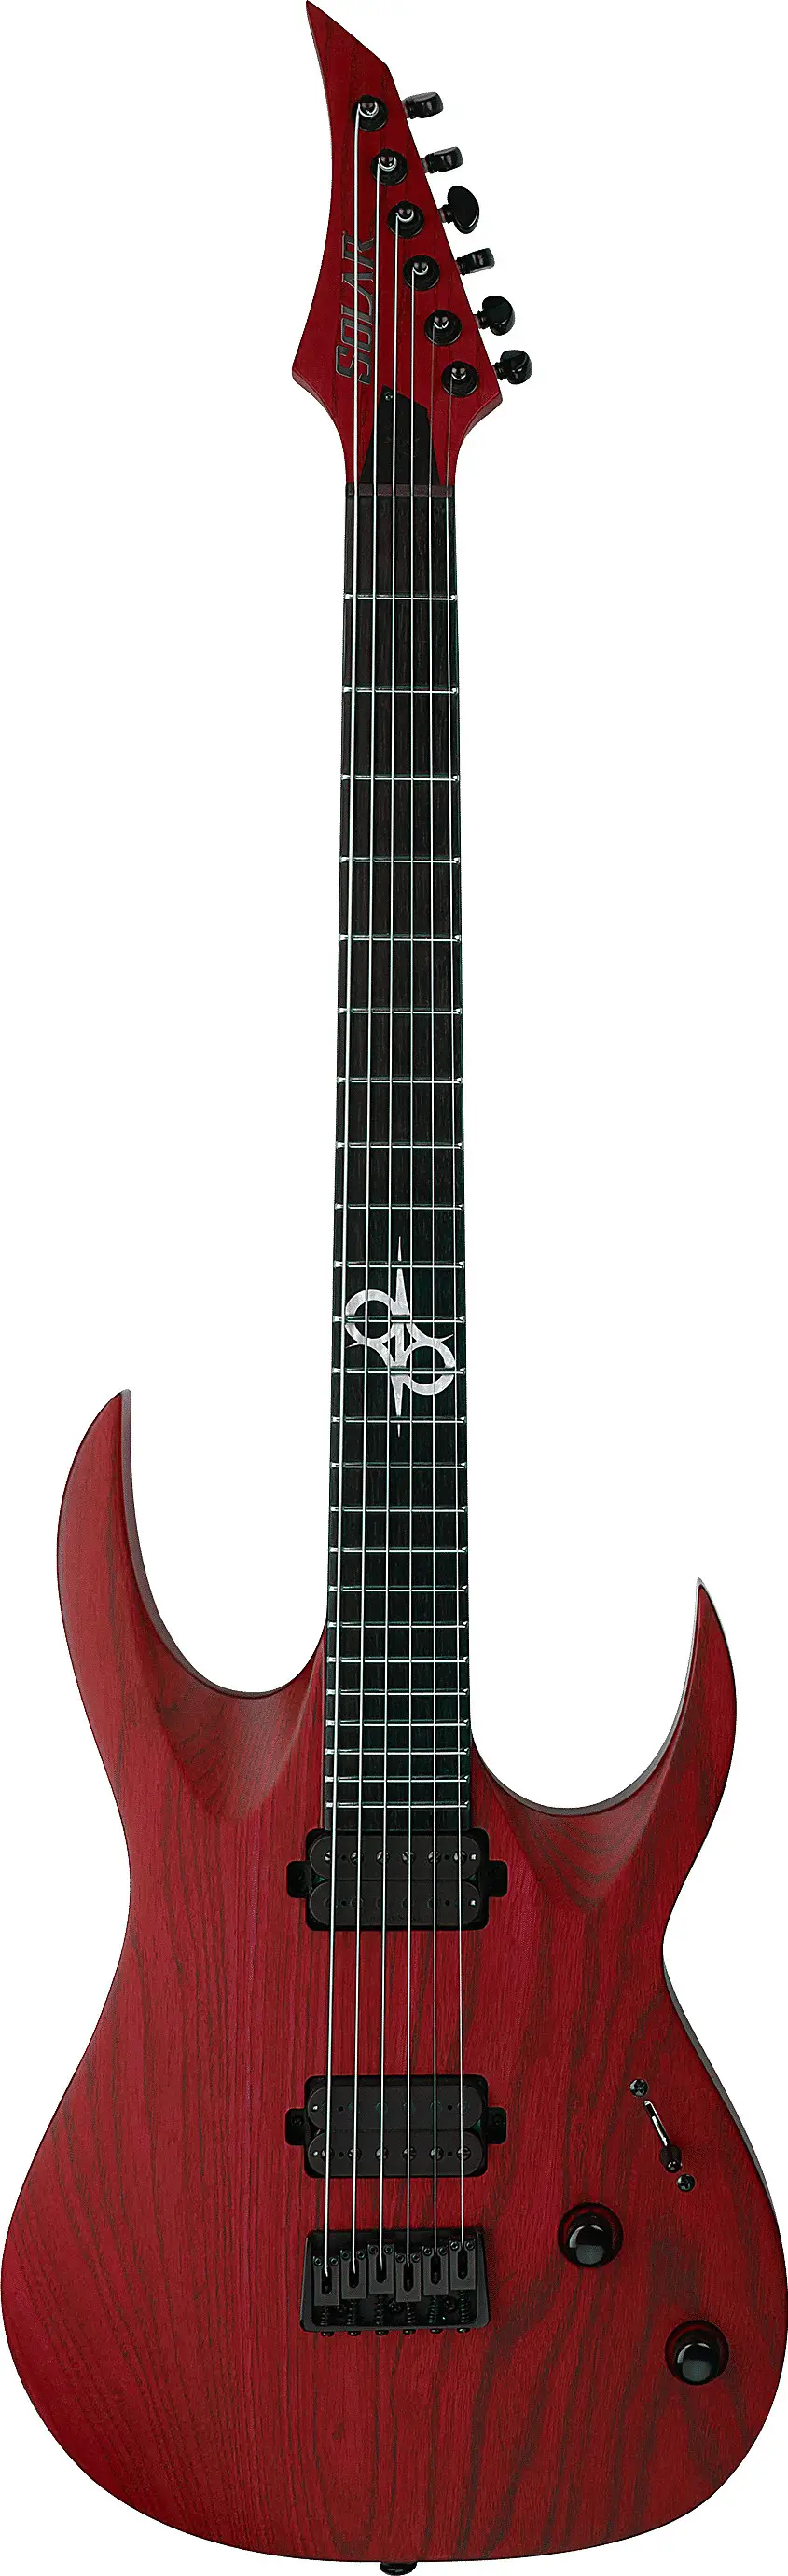 A2.6 by Solar Guitars